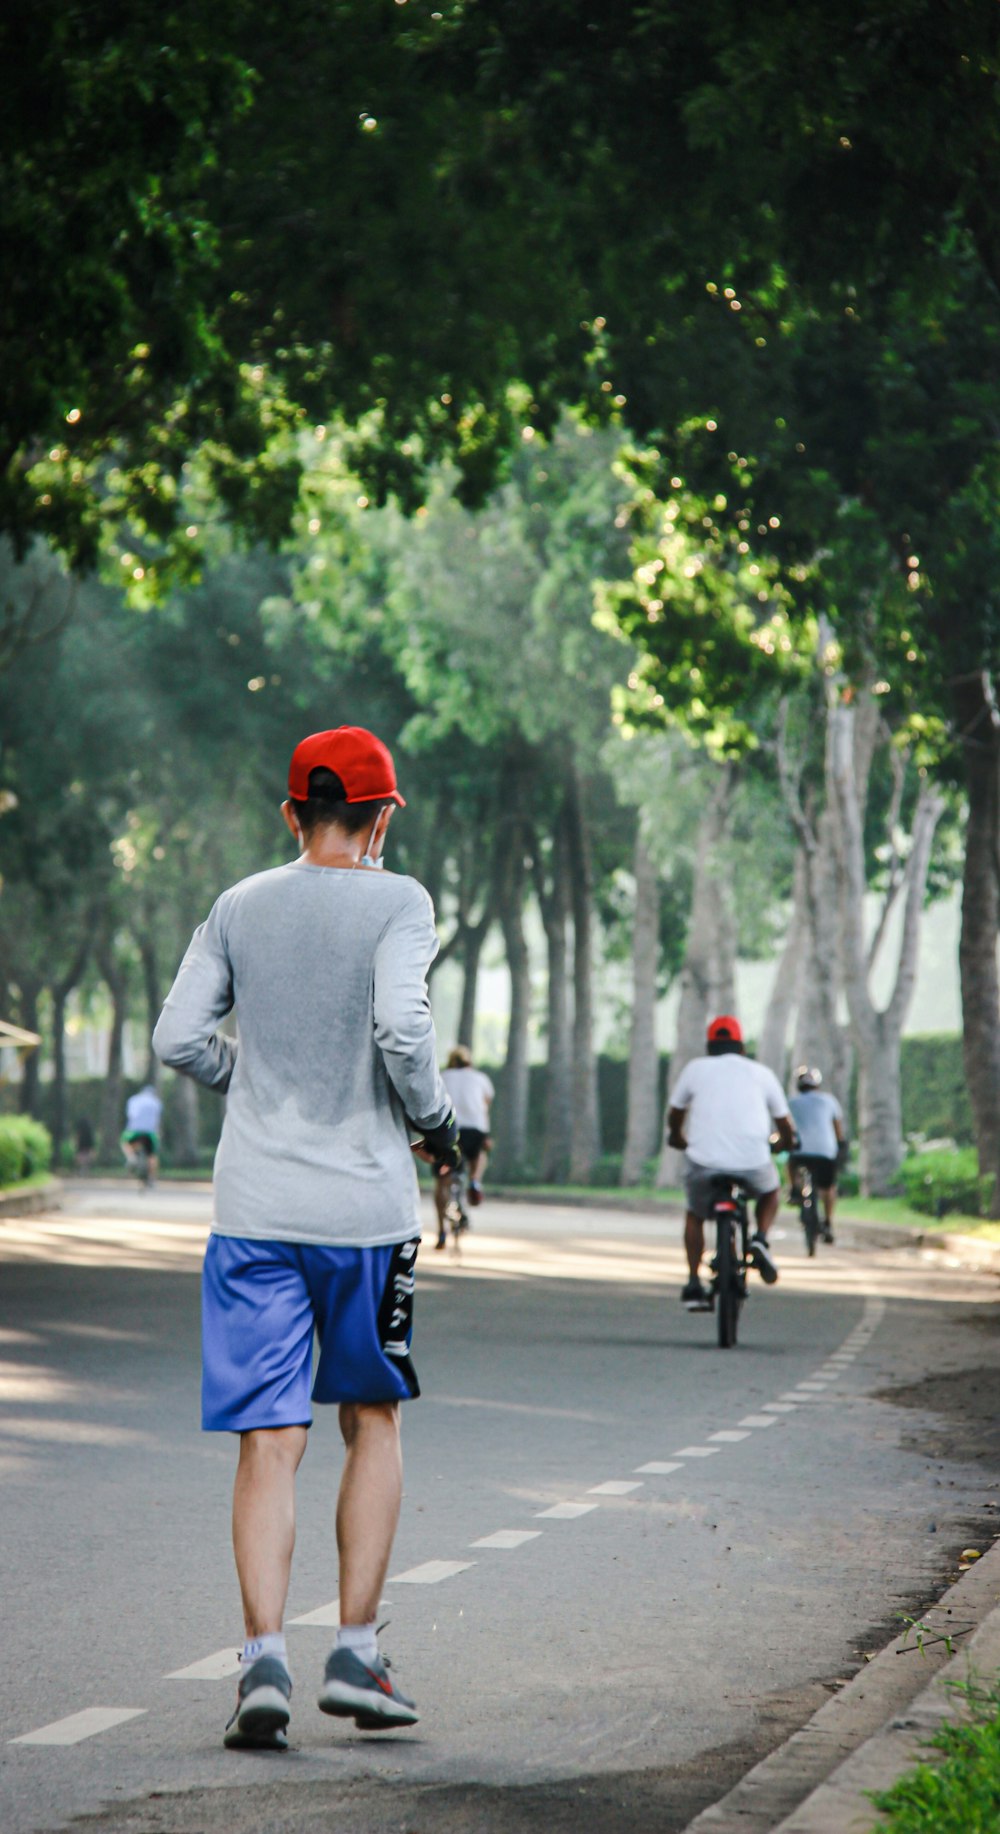 man in gray sweater and blue shorts riding bicycle on road during daytime